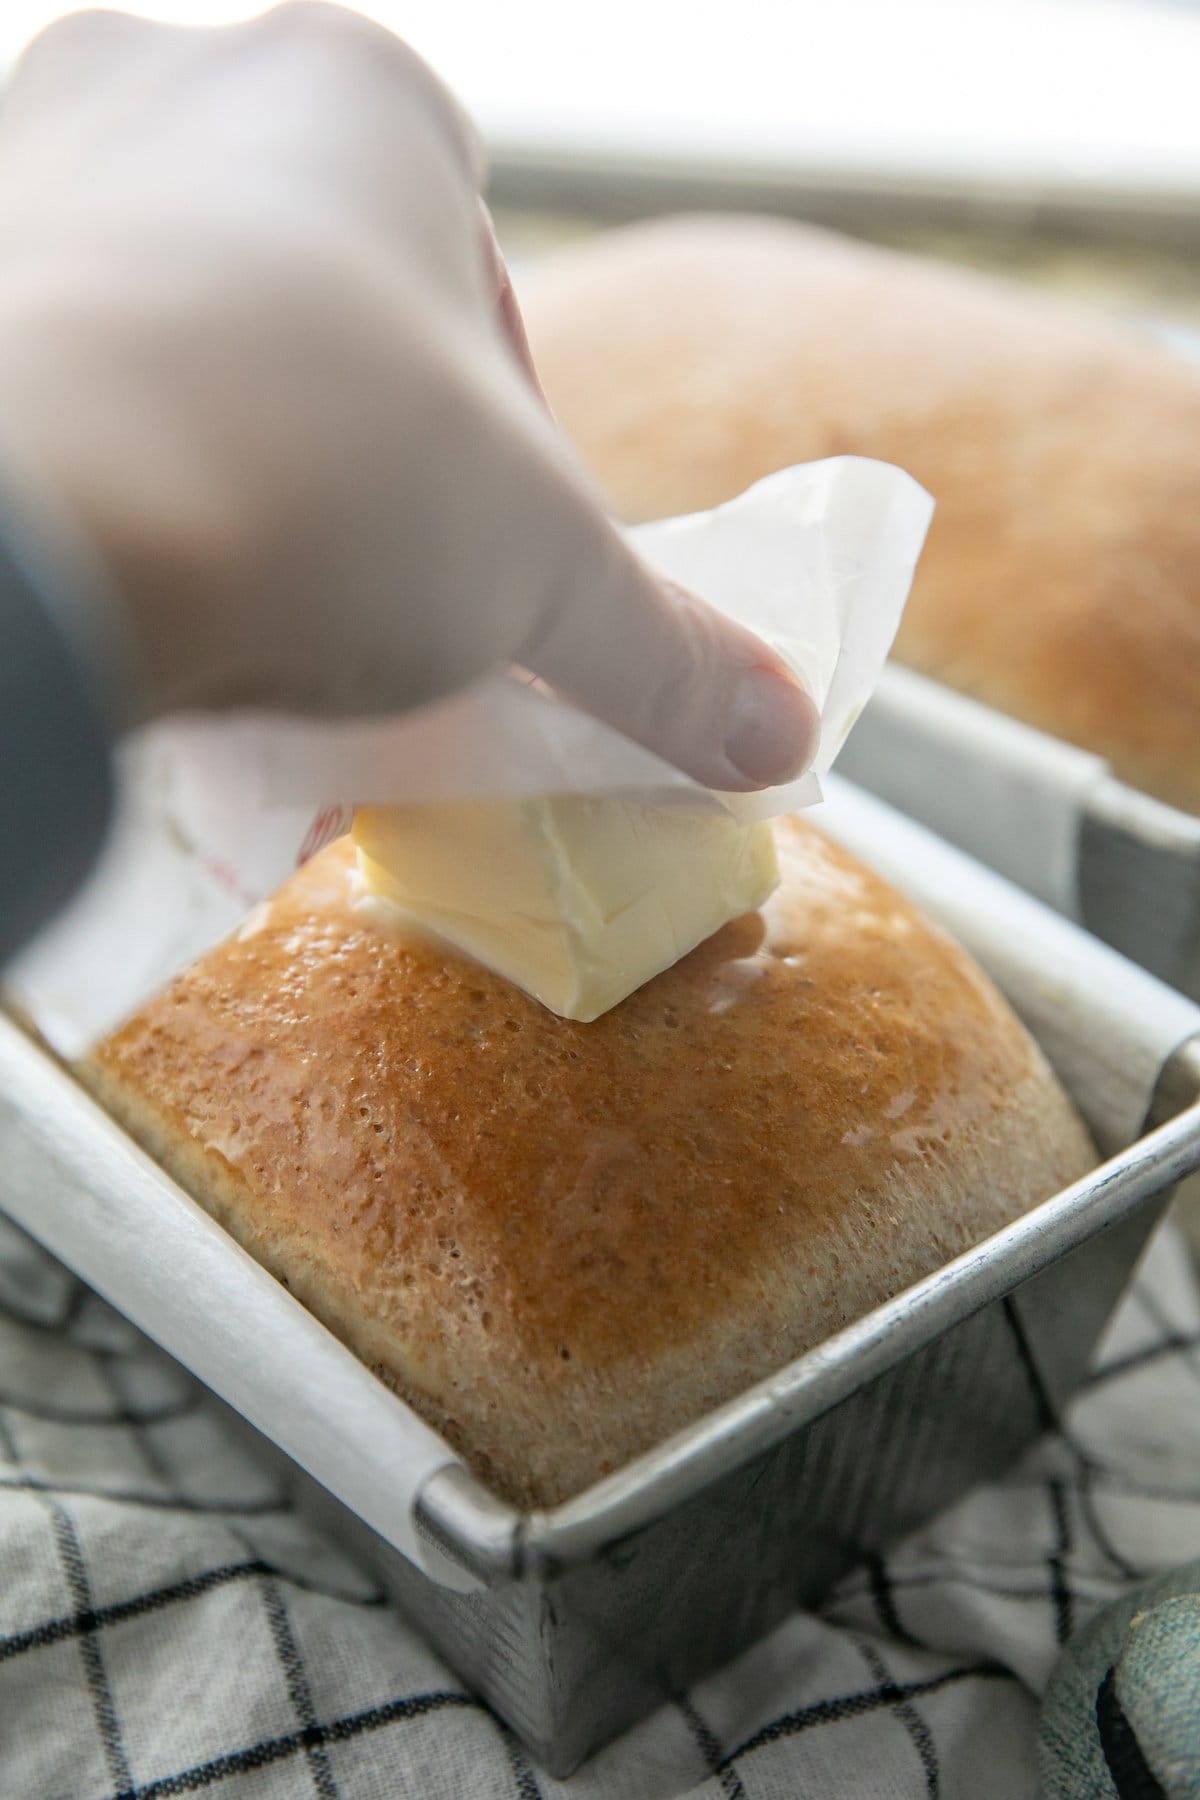 a hand rubbing a stick of butter on a freshly baked loaf of bread still in the pan